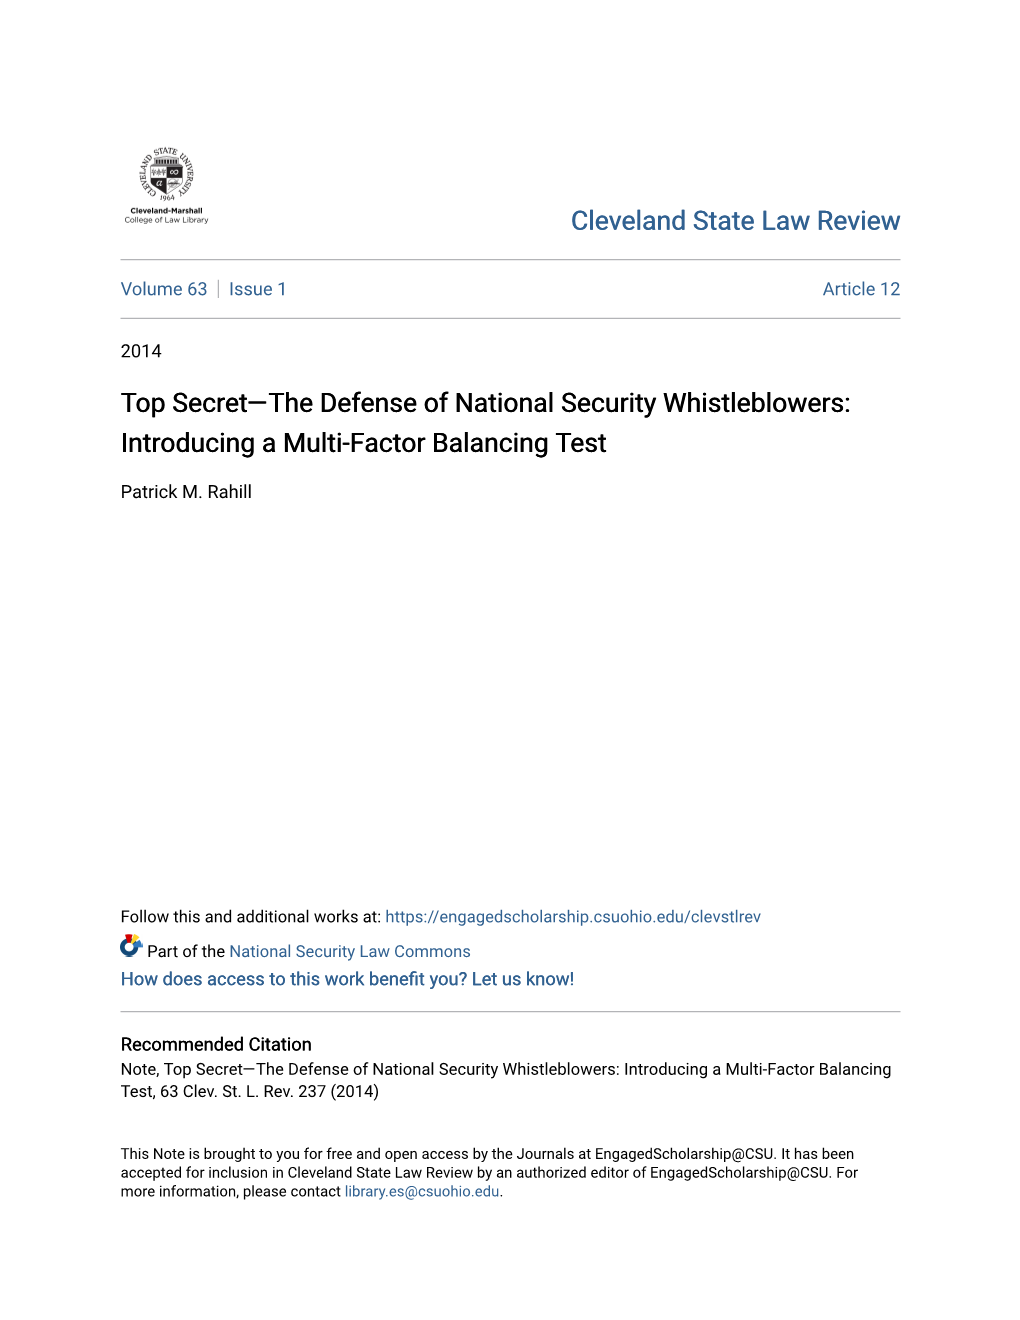 Top Secret—The Defense of National Security Whistleblowers: Introducing a Multi-Factor Balancing Test